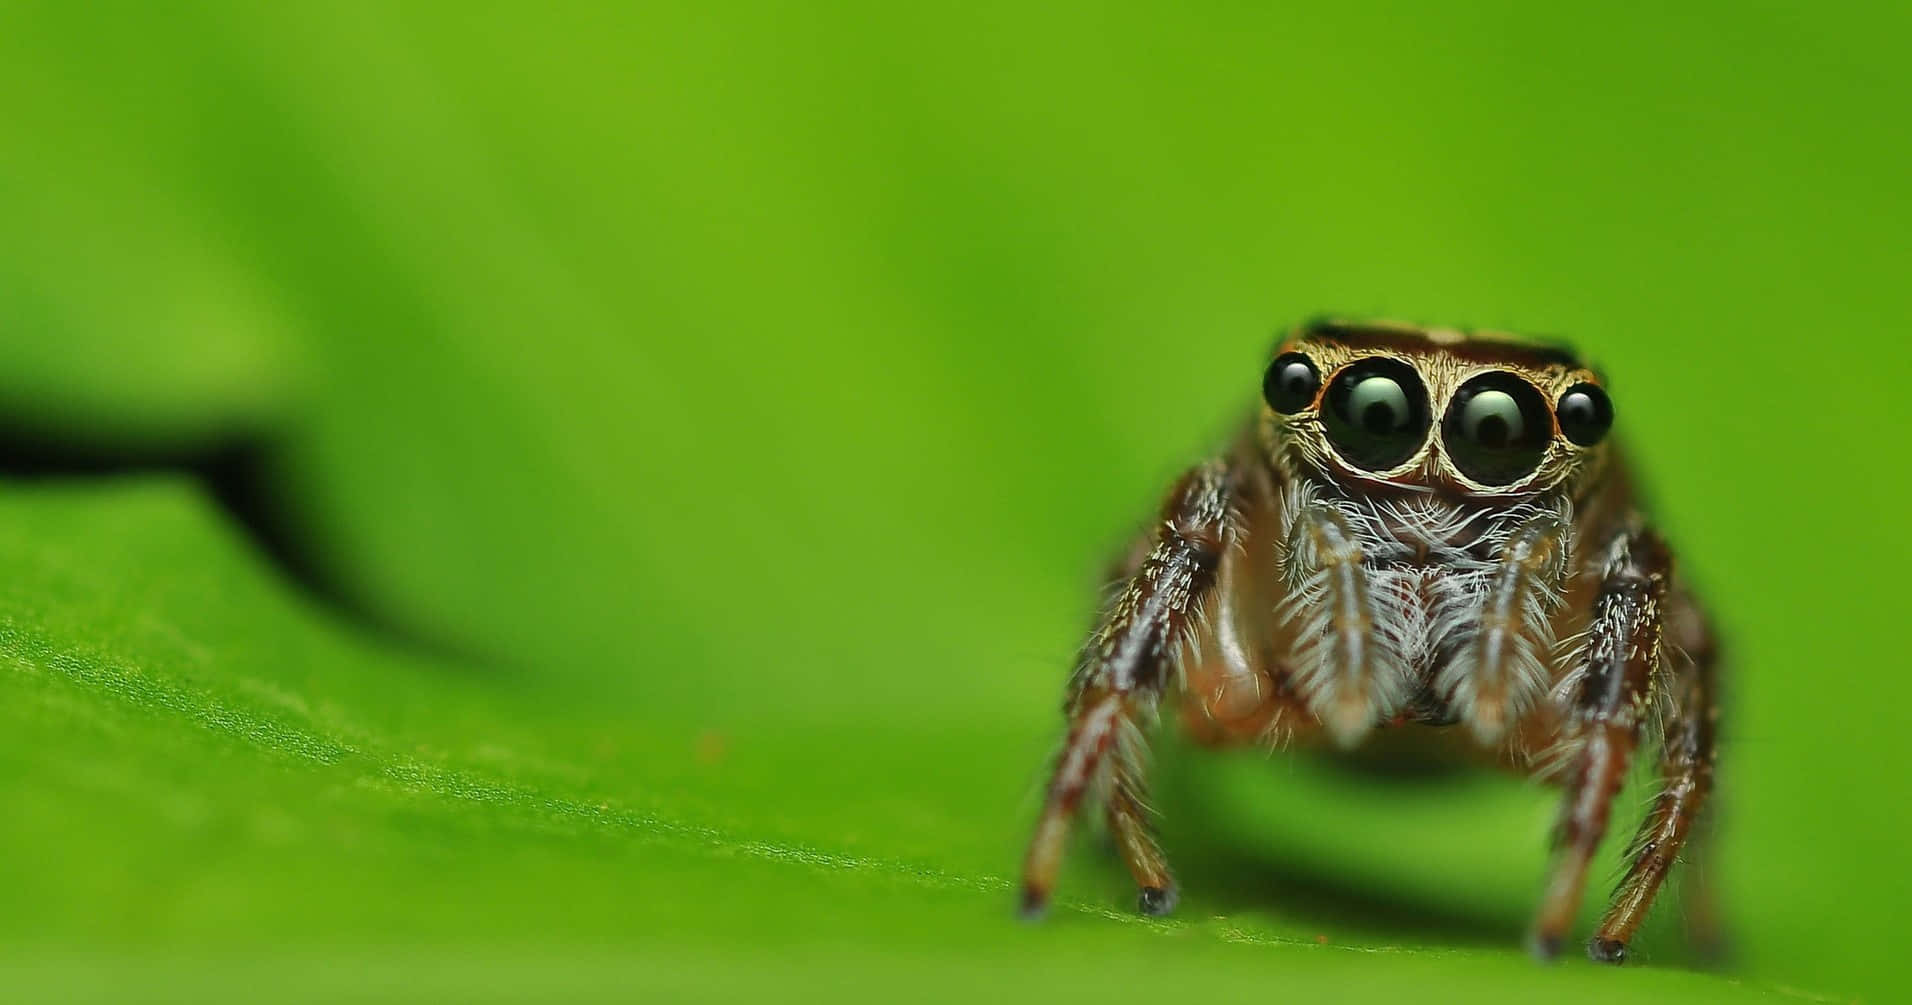 A Cute Insects Spider Wallpaper